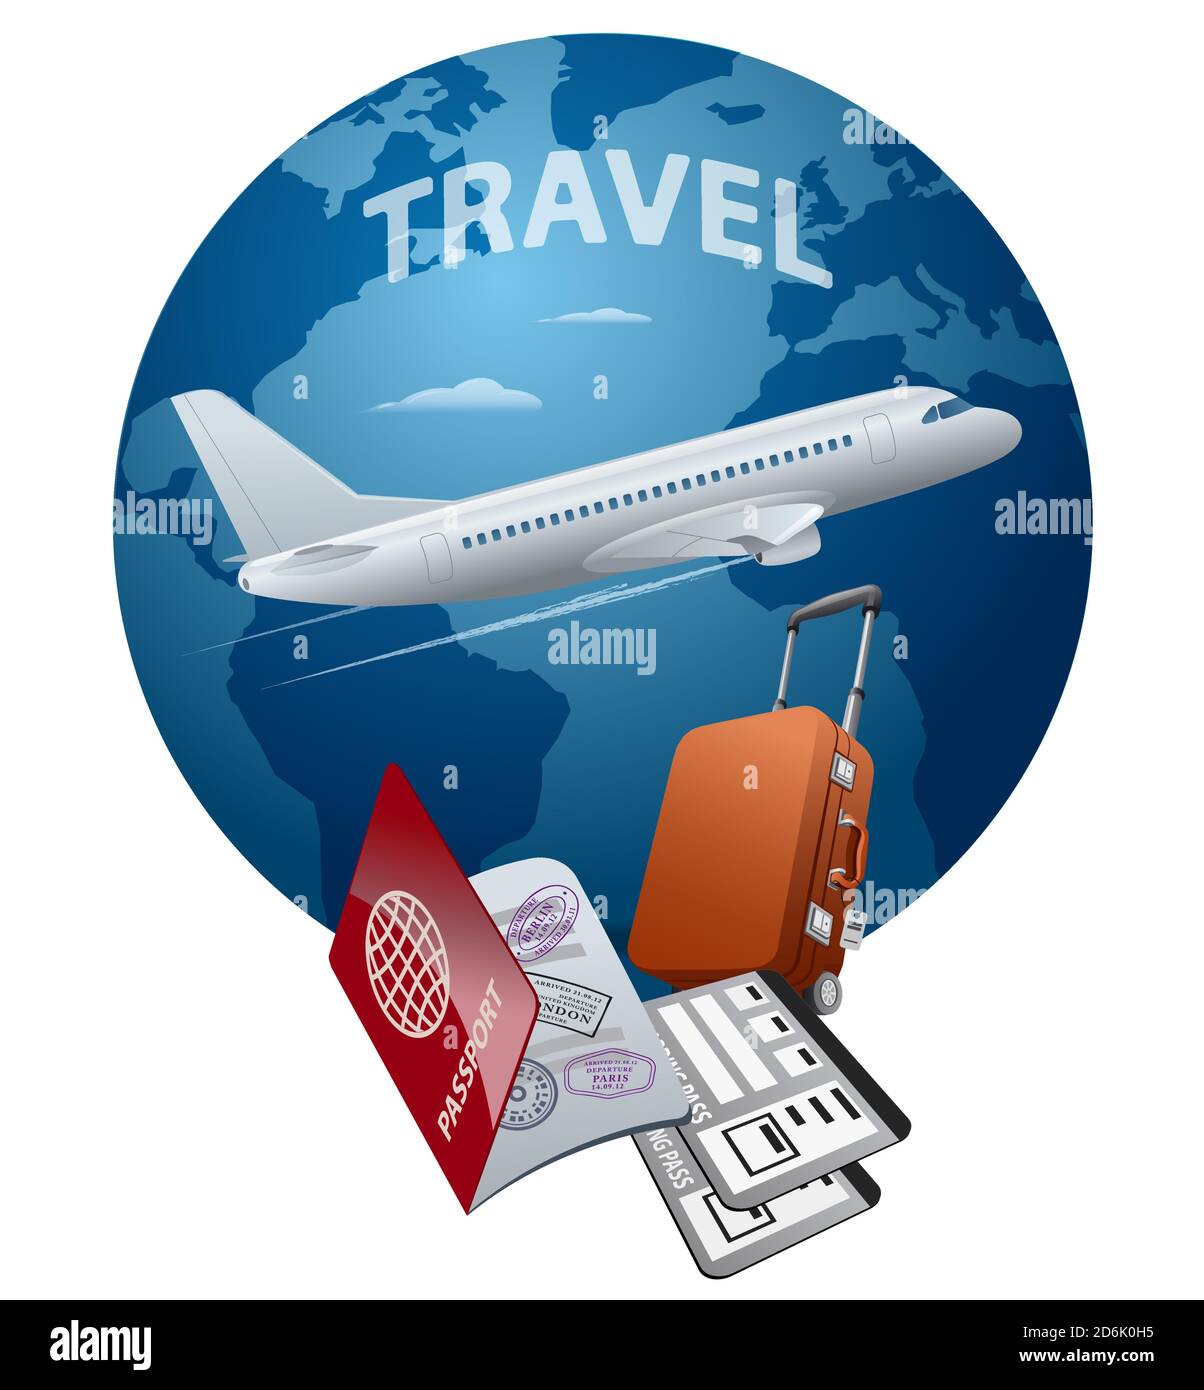 concept illustration of the air travel around the world Stock Vector